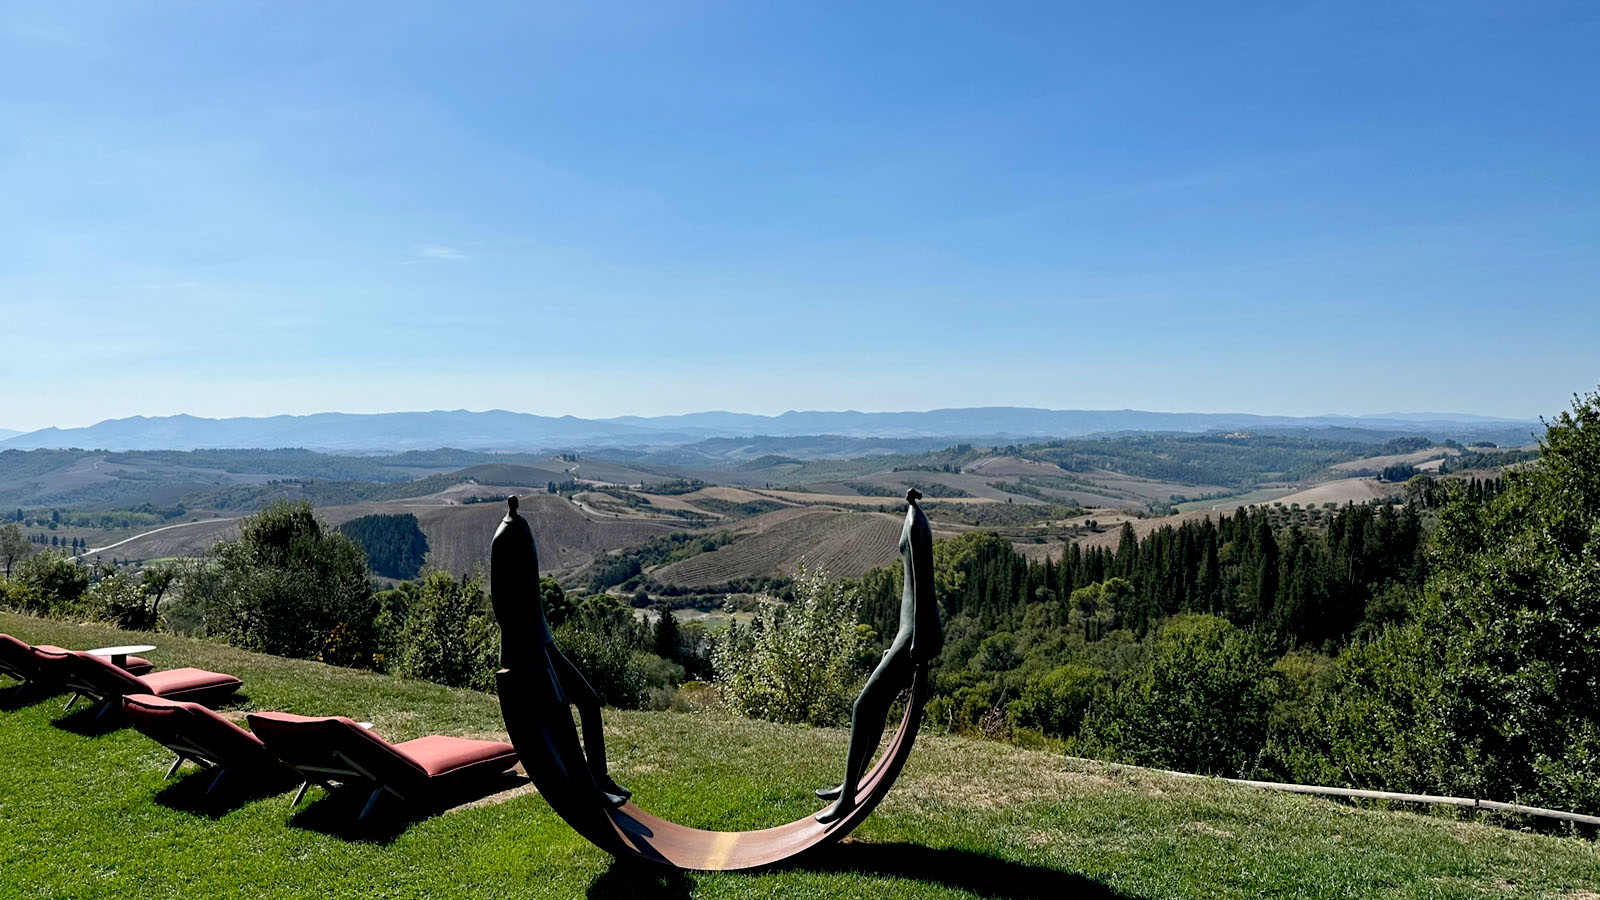 Golf With Unrivaled Views: Why The Dreamy Castelfalfi Resort Should Be On Your List To Play And Stay